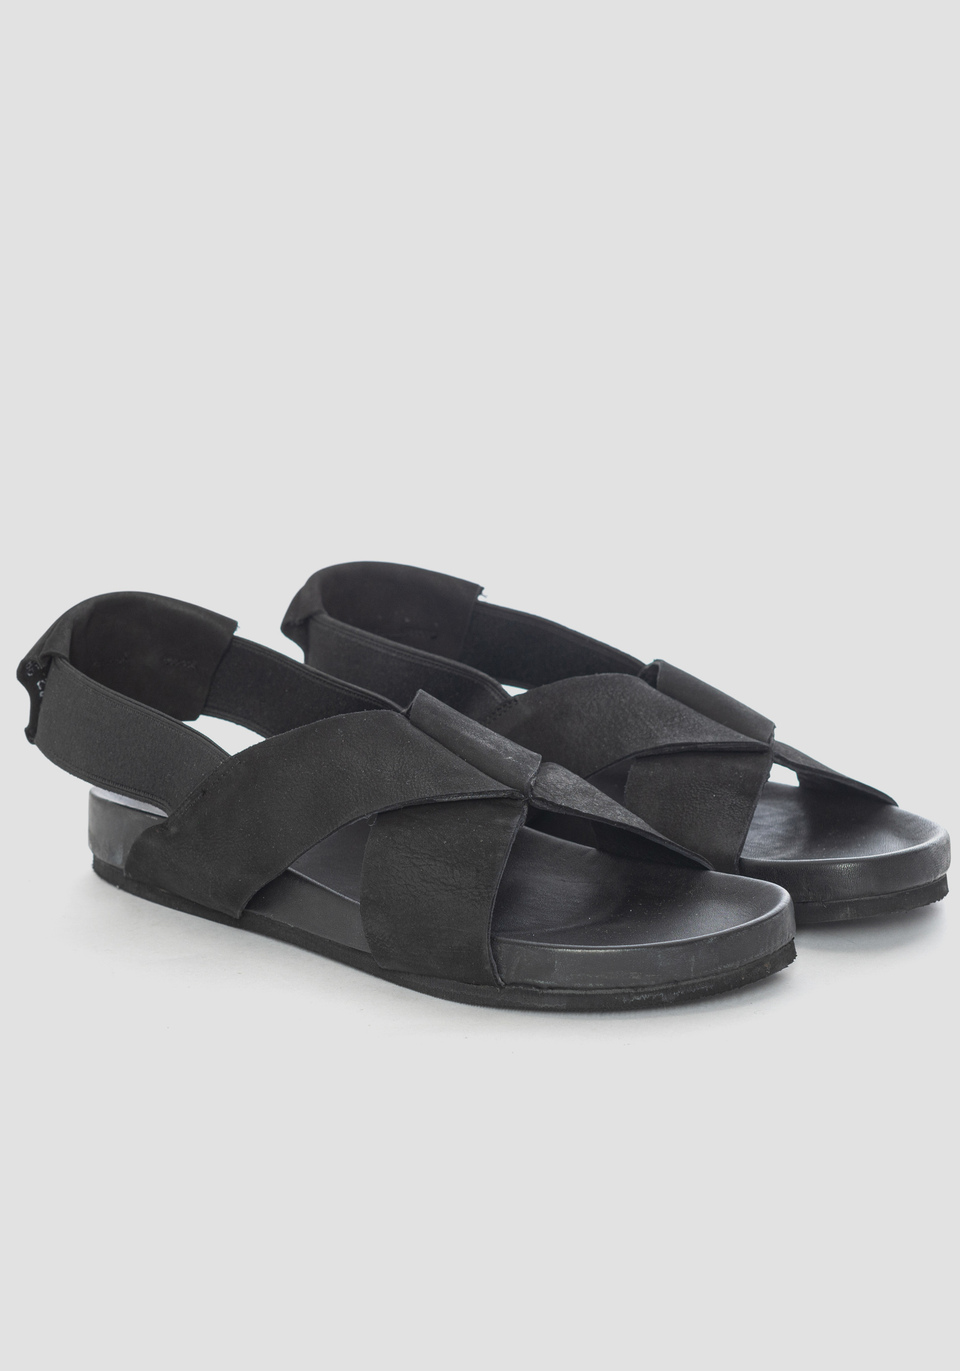 SANDAL IN 100% SUPPLE LEATHER WITH SUEDE STRAPS - Antony Morato Online Shop